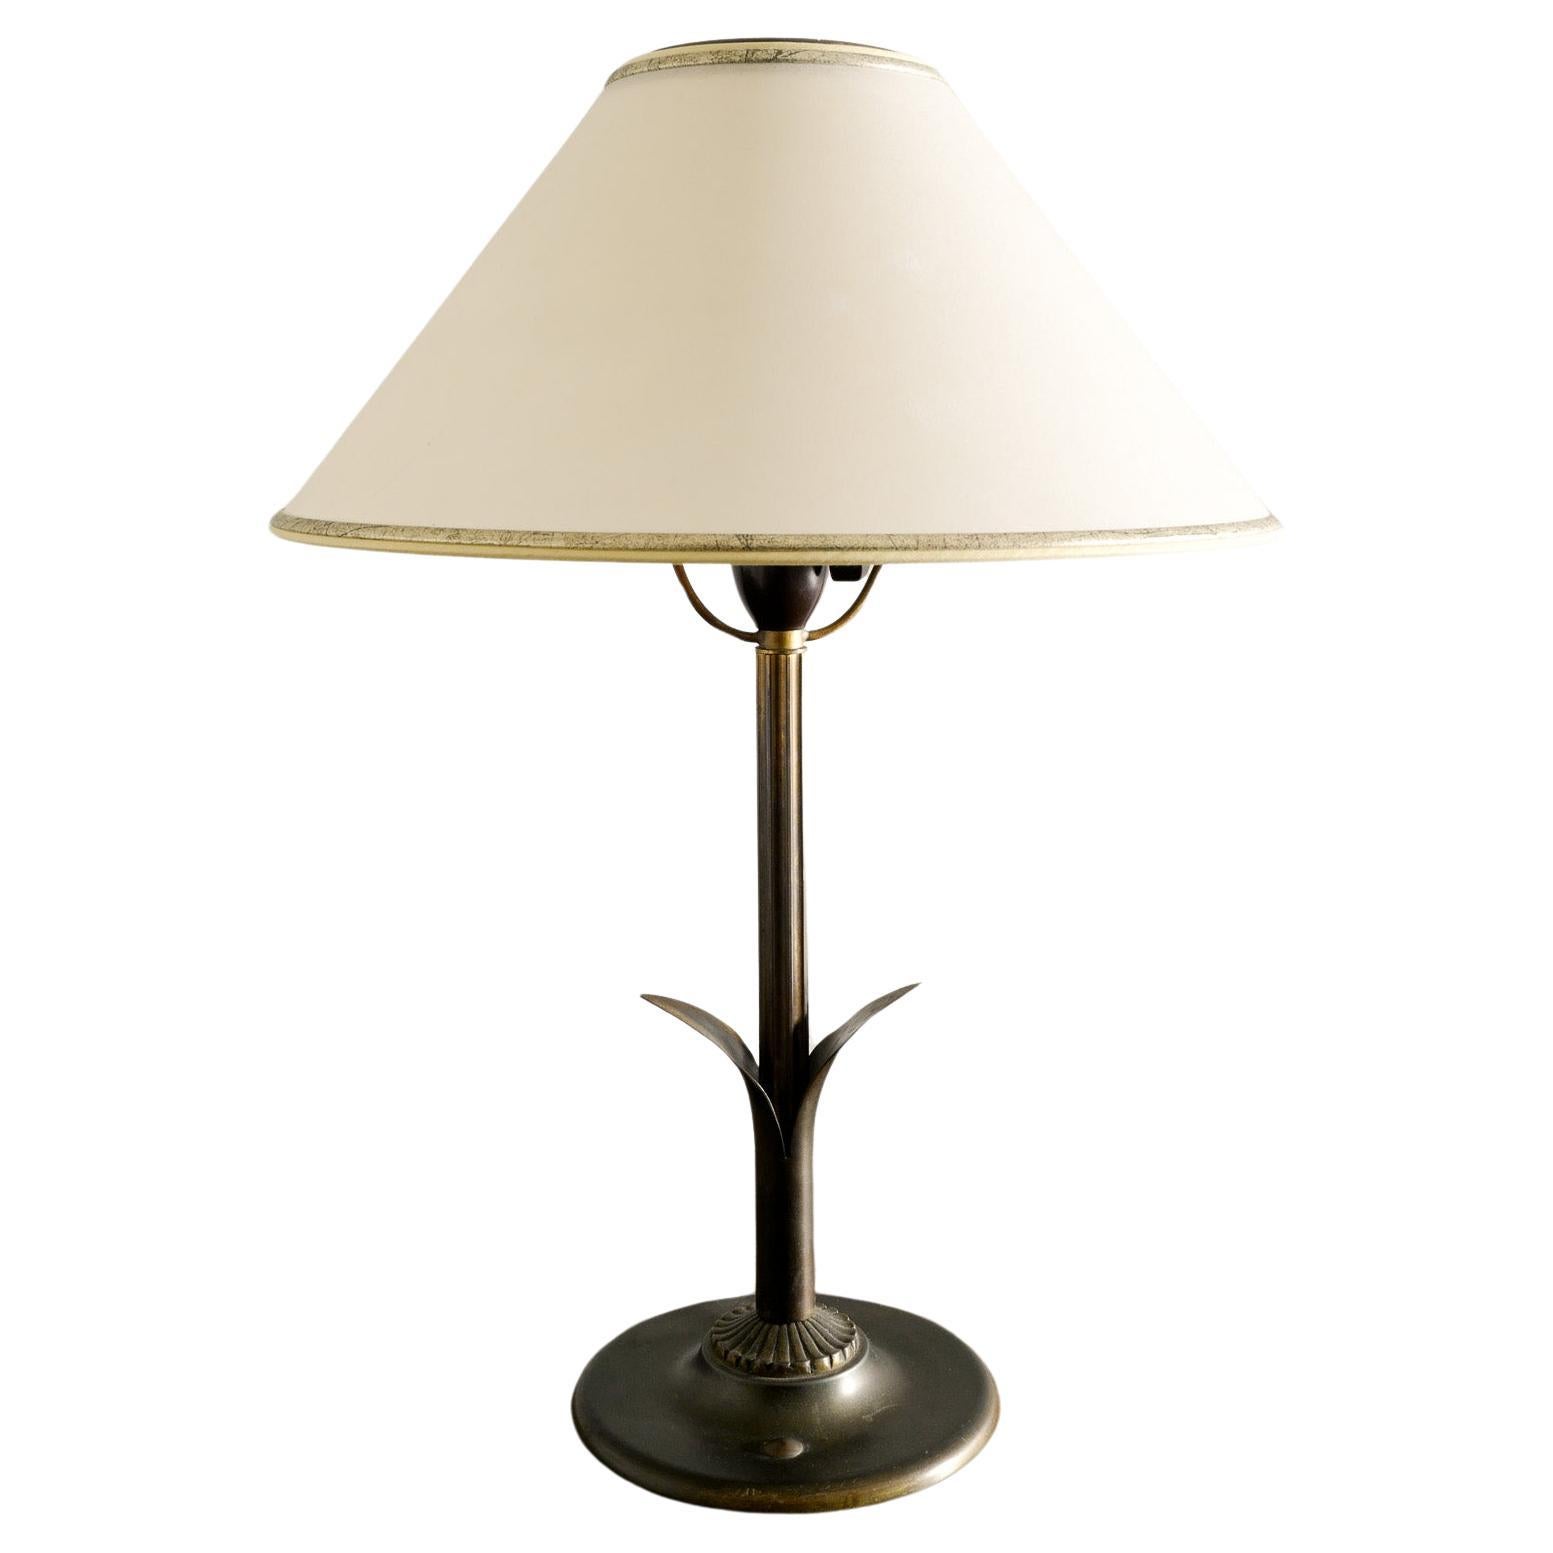 Danish Decorative Art Déco Table Lamp in Bronze with Original Shade, 1930s 